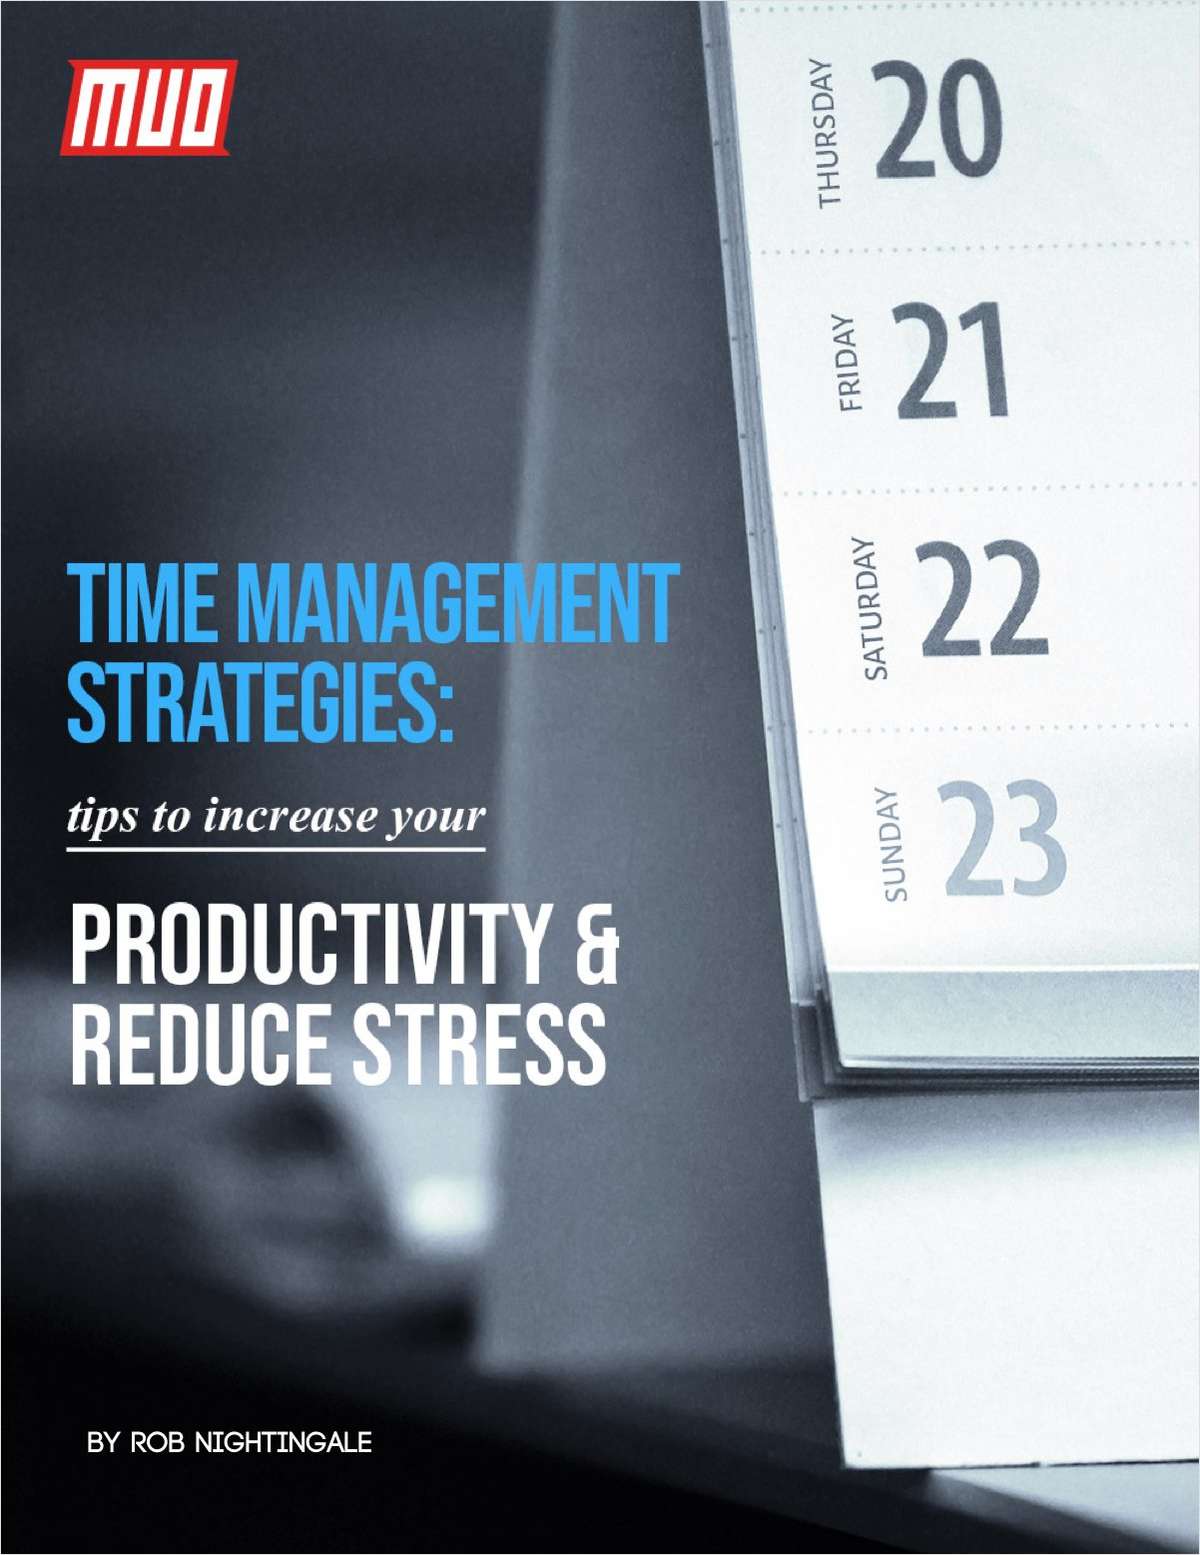 Time Management Strategies: Tips to increase your productivity and reduce stress